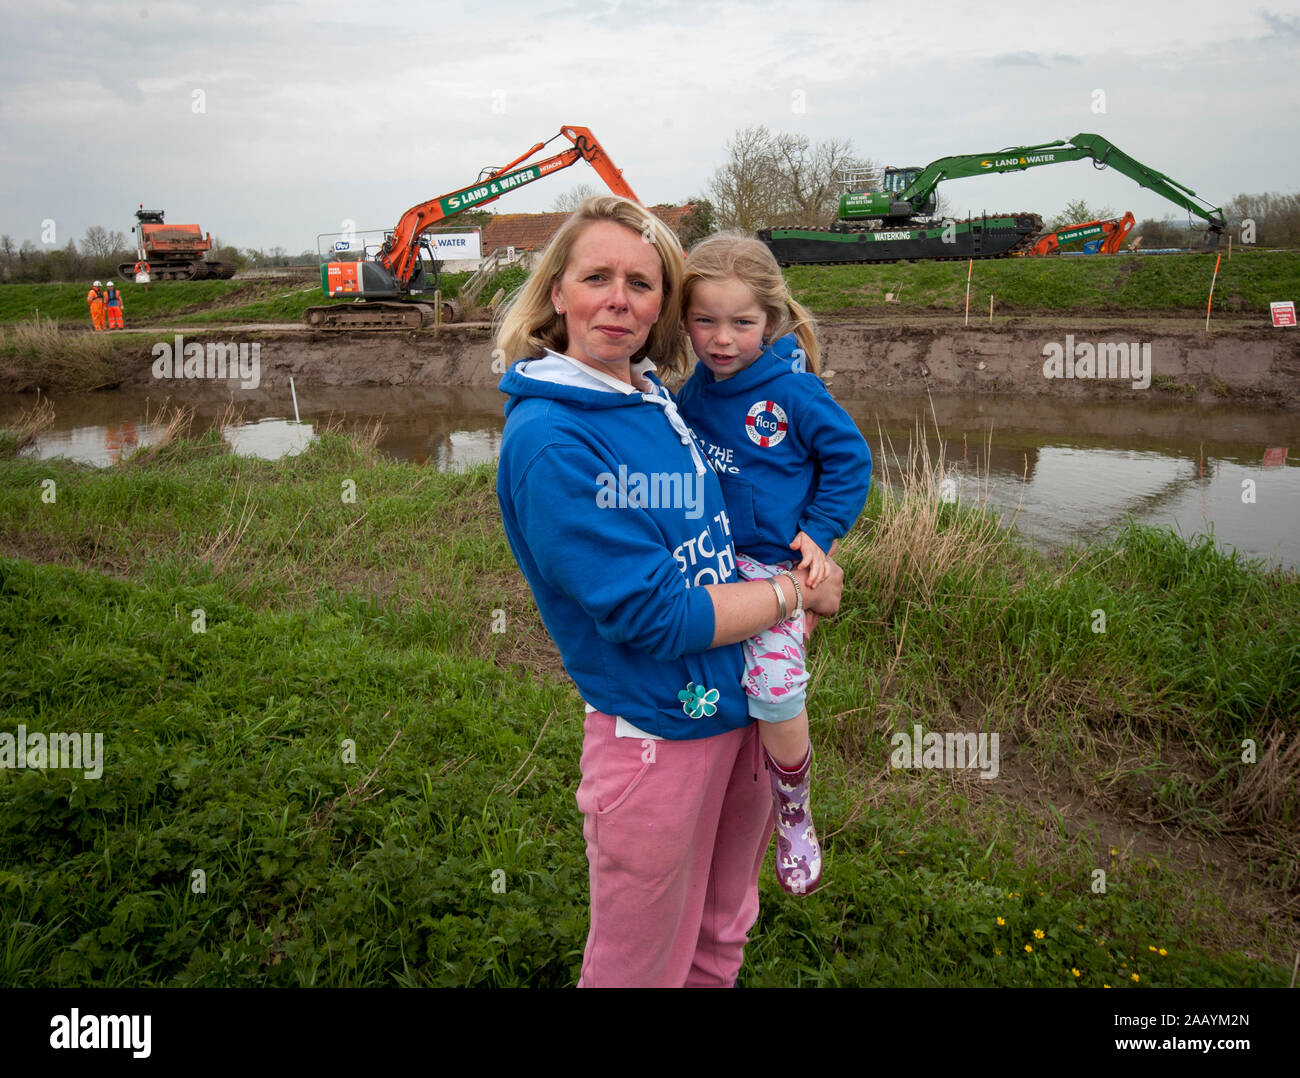 Dredging begins on the local river to prevent further flooding at Moreland in Somerset. Victims of the recent flooding Bryony Sadler and her three year old Elsa are hoping that the dredging of the the river will prevent future flooding. March 2014 Stock Photo